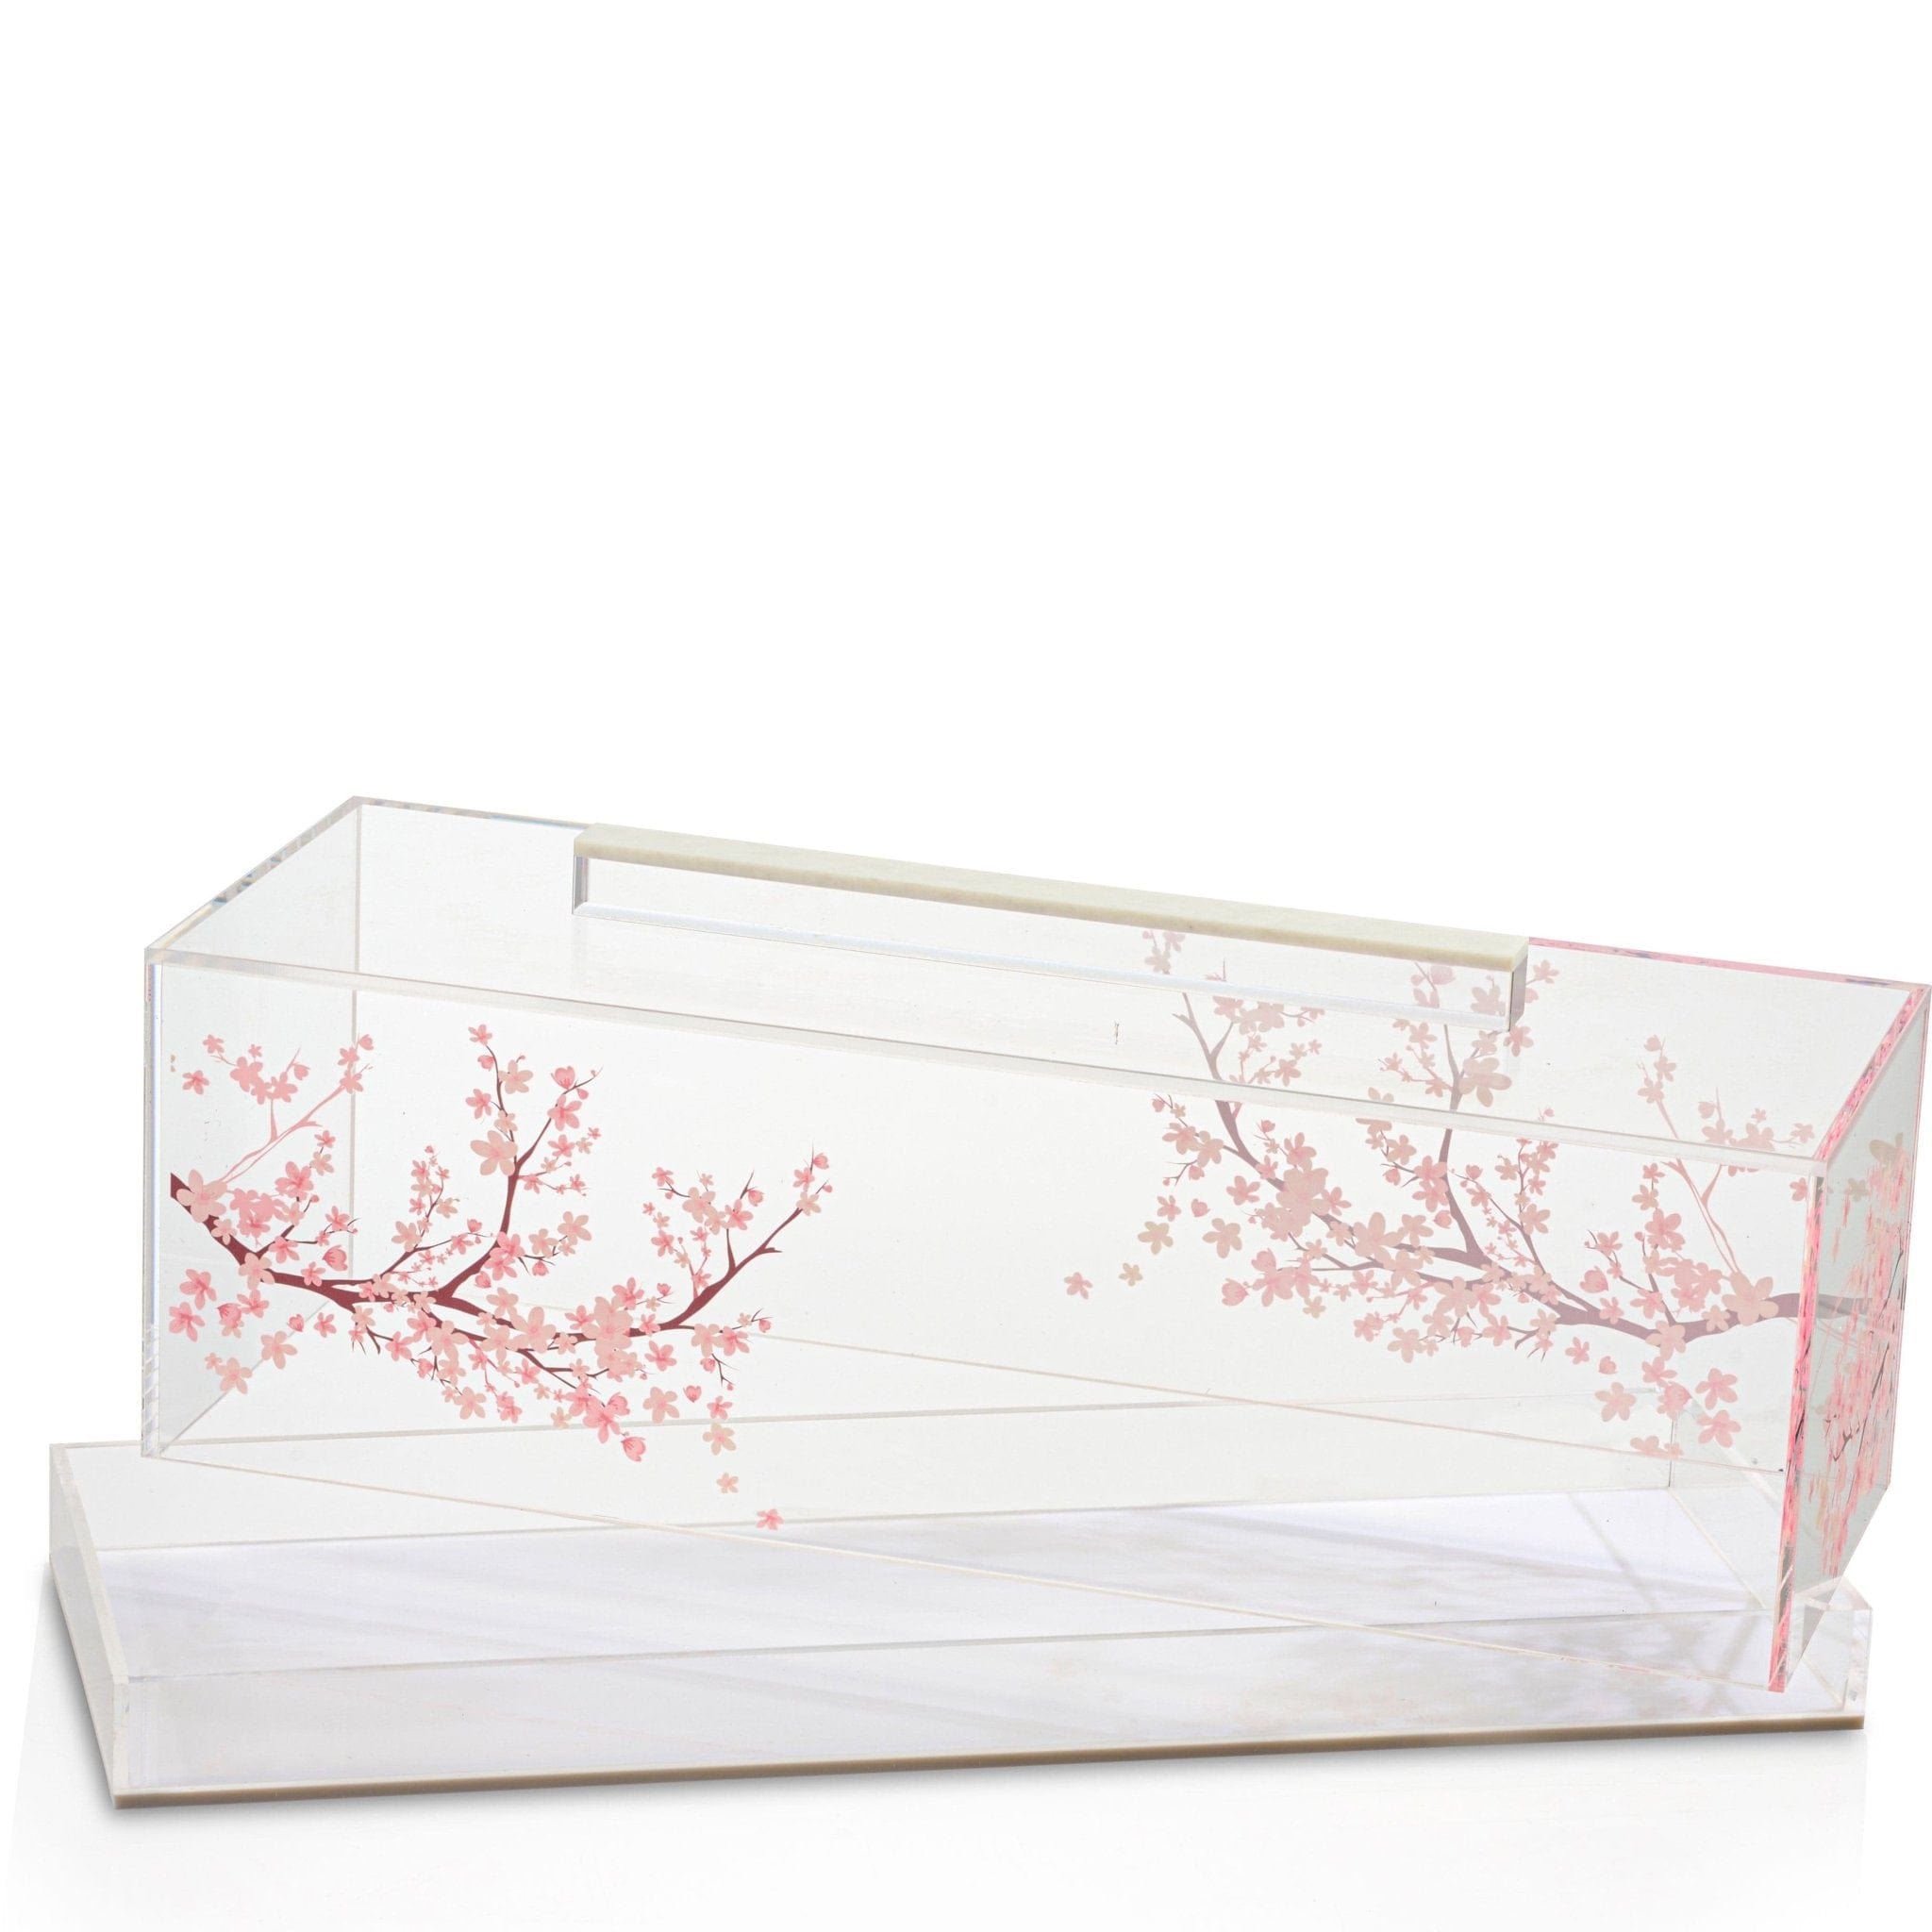 Cherry Blossom Cake Dome - Waterdale Collection